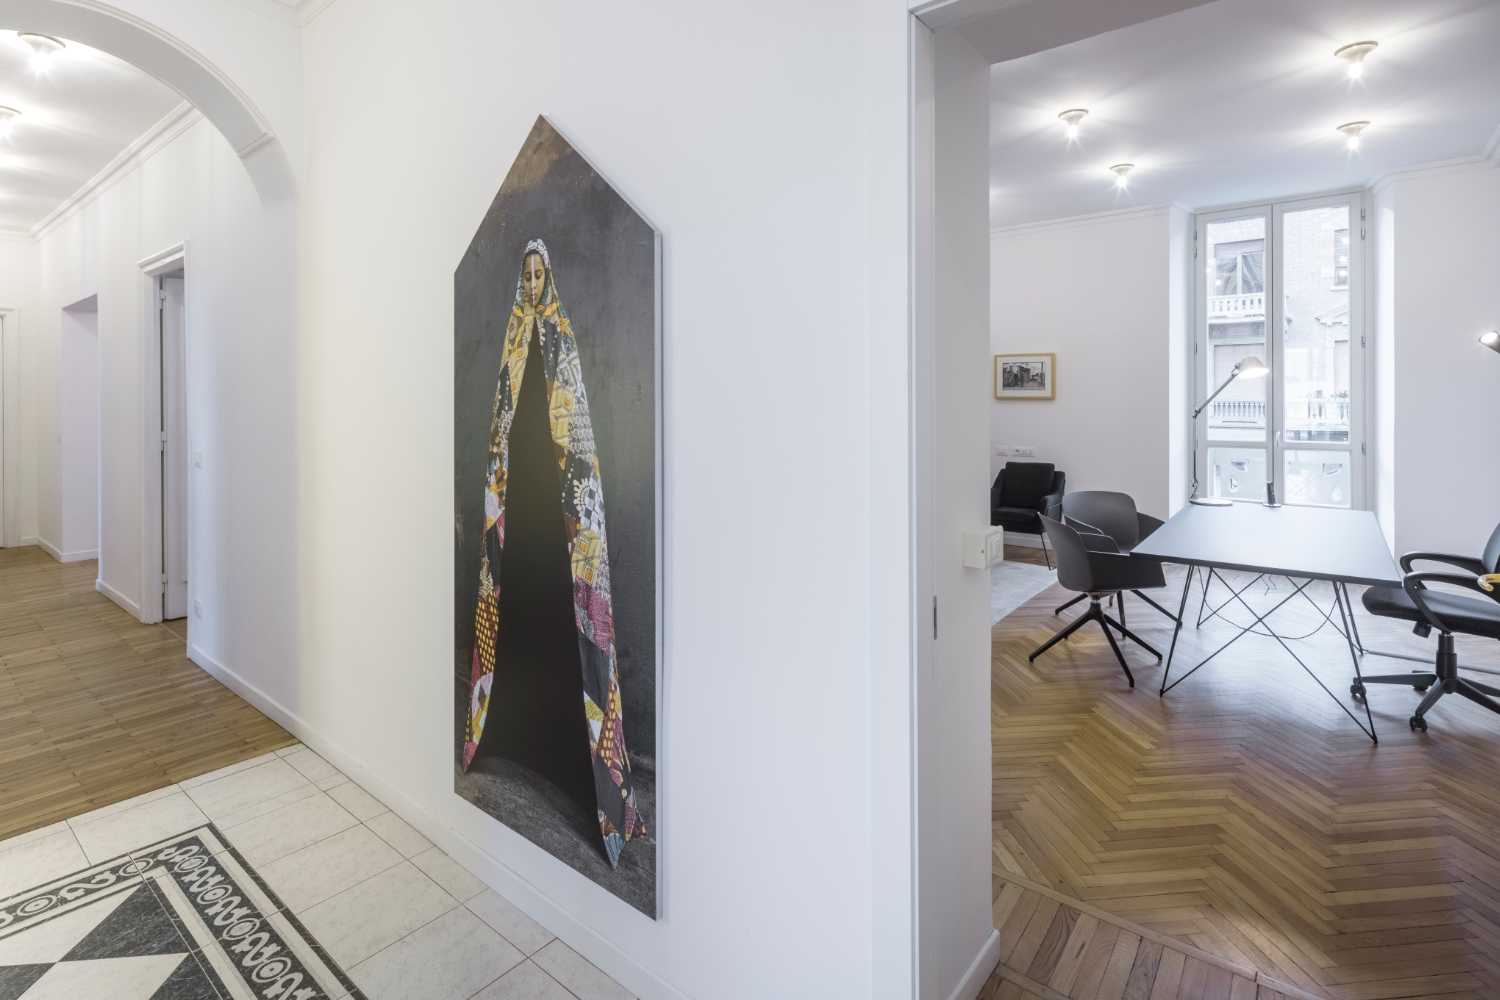 Artea Foundation's operating headquarters. A neutral space as a backdrop to art